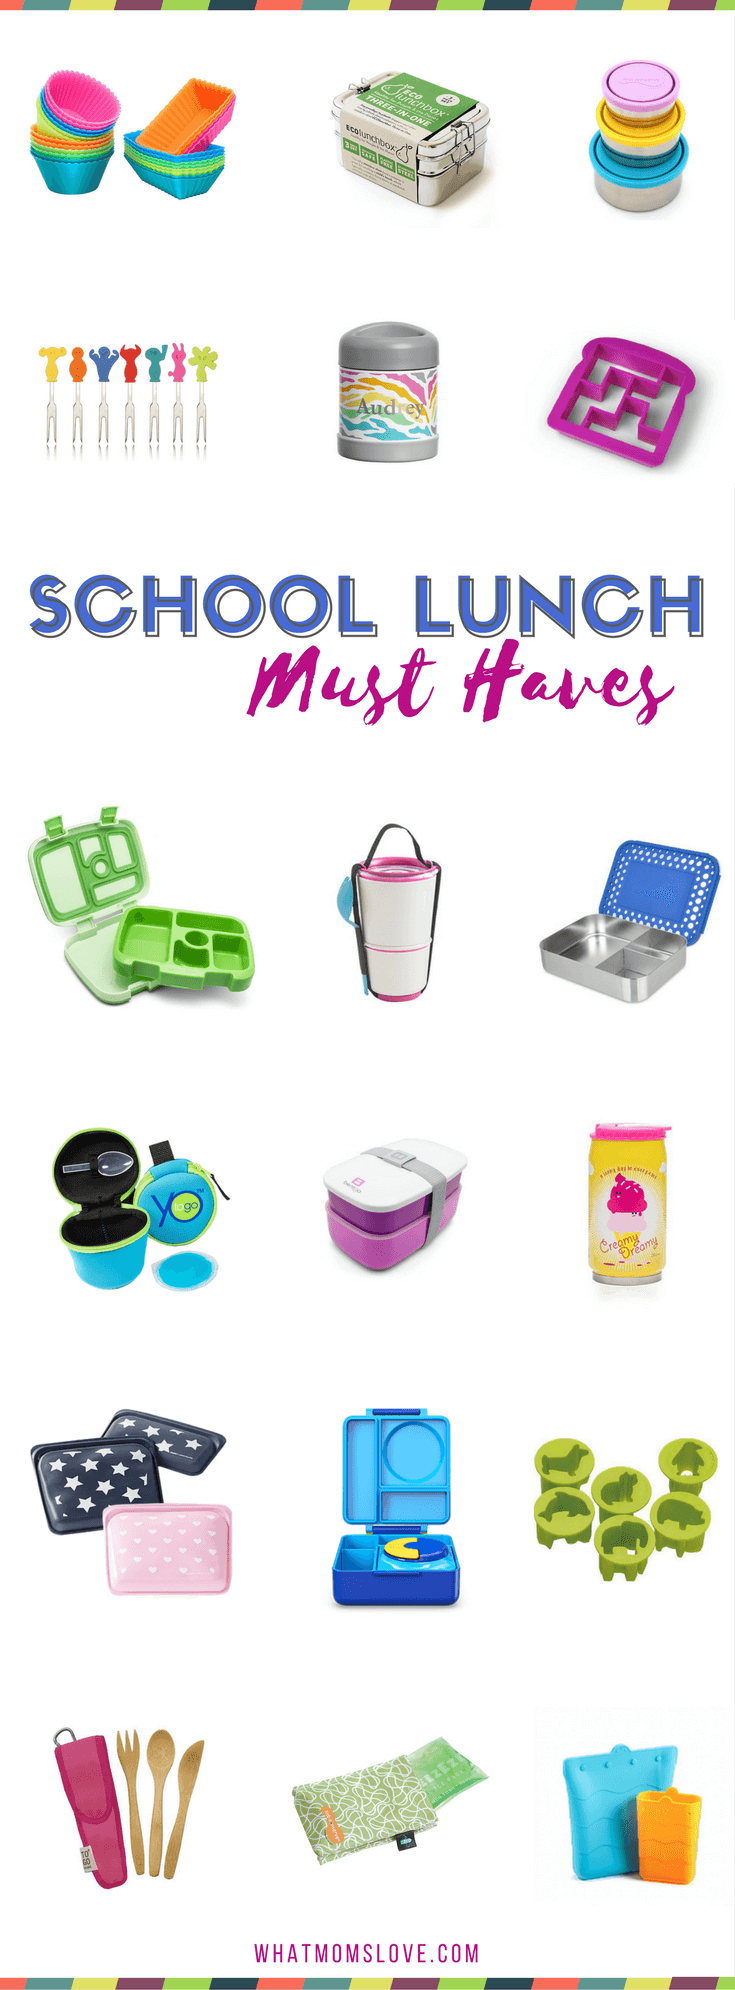 https://cdn.whatmomslove.com/wp-content/uploads/2017/07/Back-to-School-Lunch-Must-Haves-MAIN-PIN-1.png